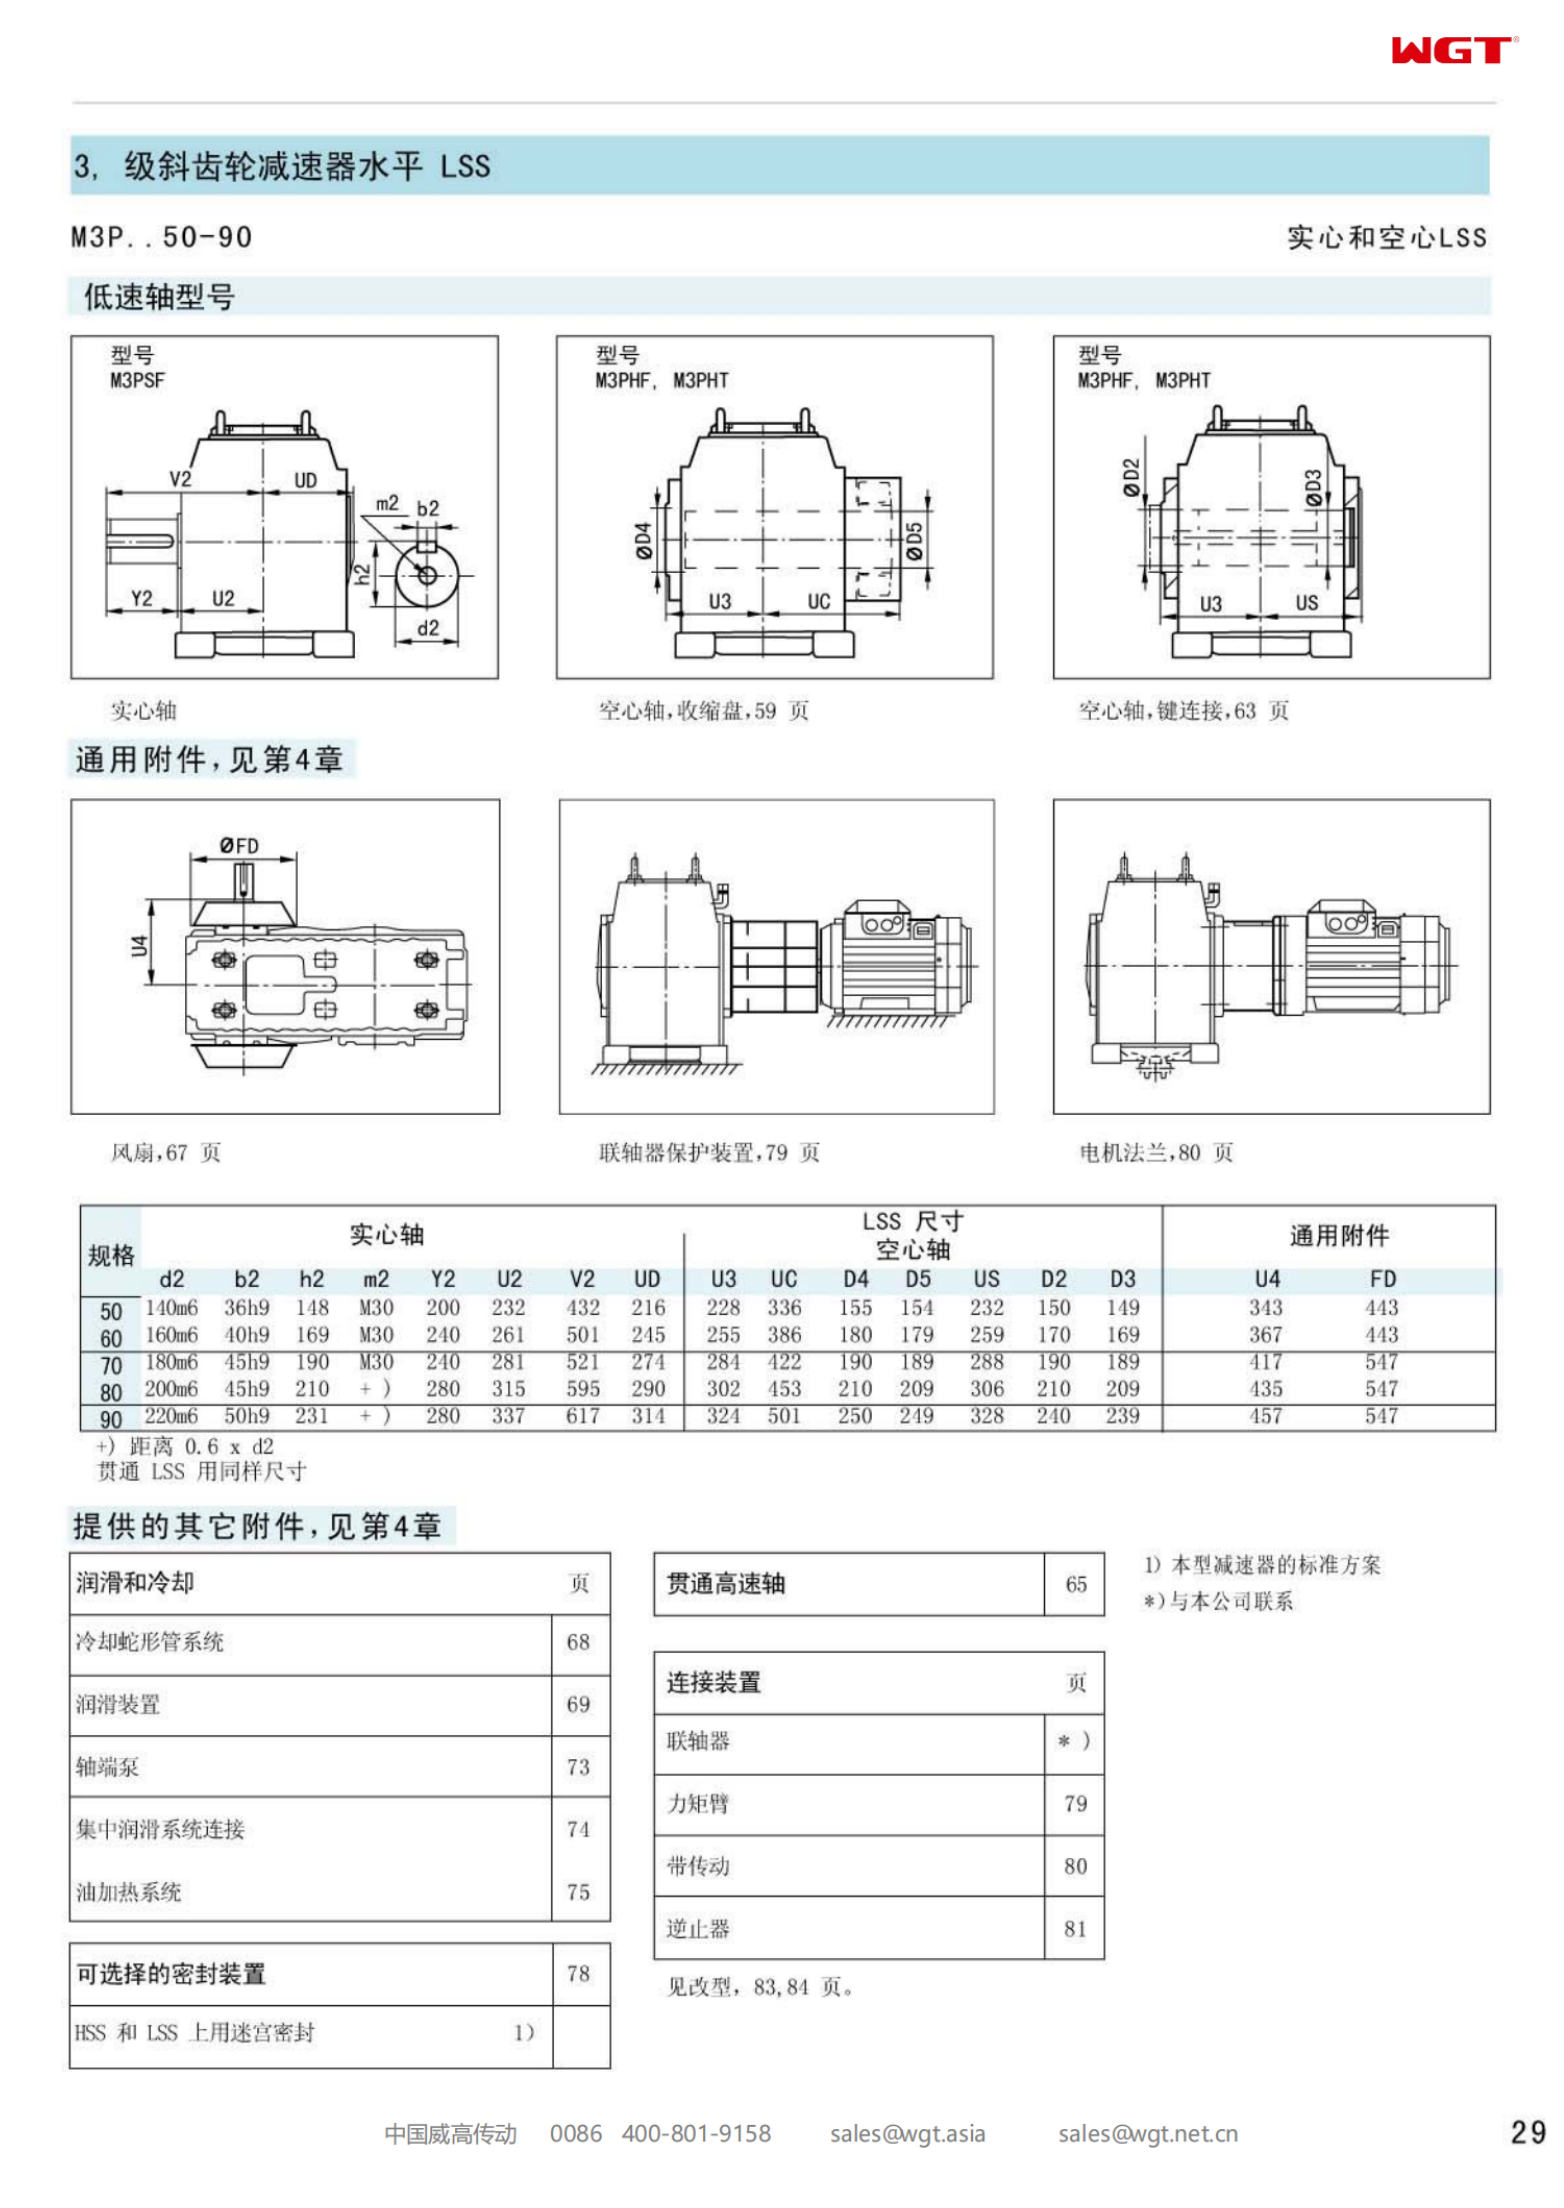 M3PHF50 Replace_SEW_M_Series Gearbox